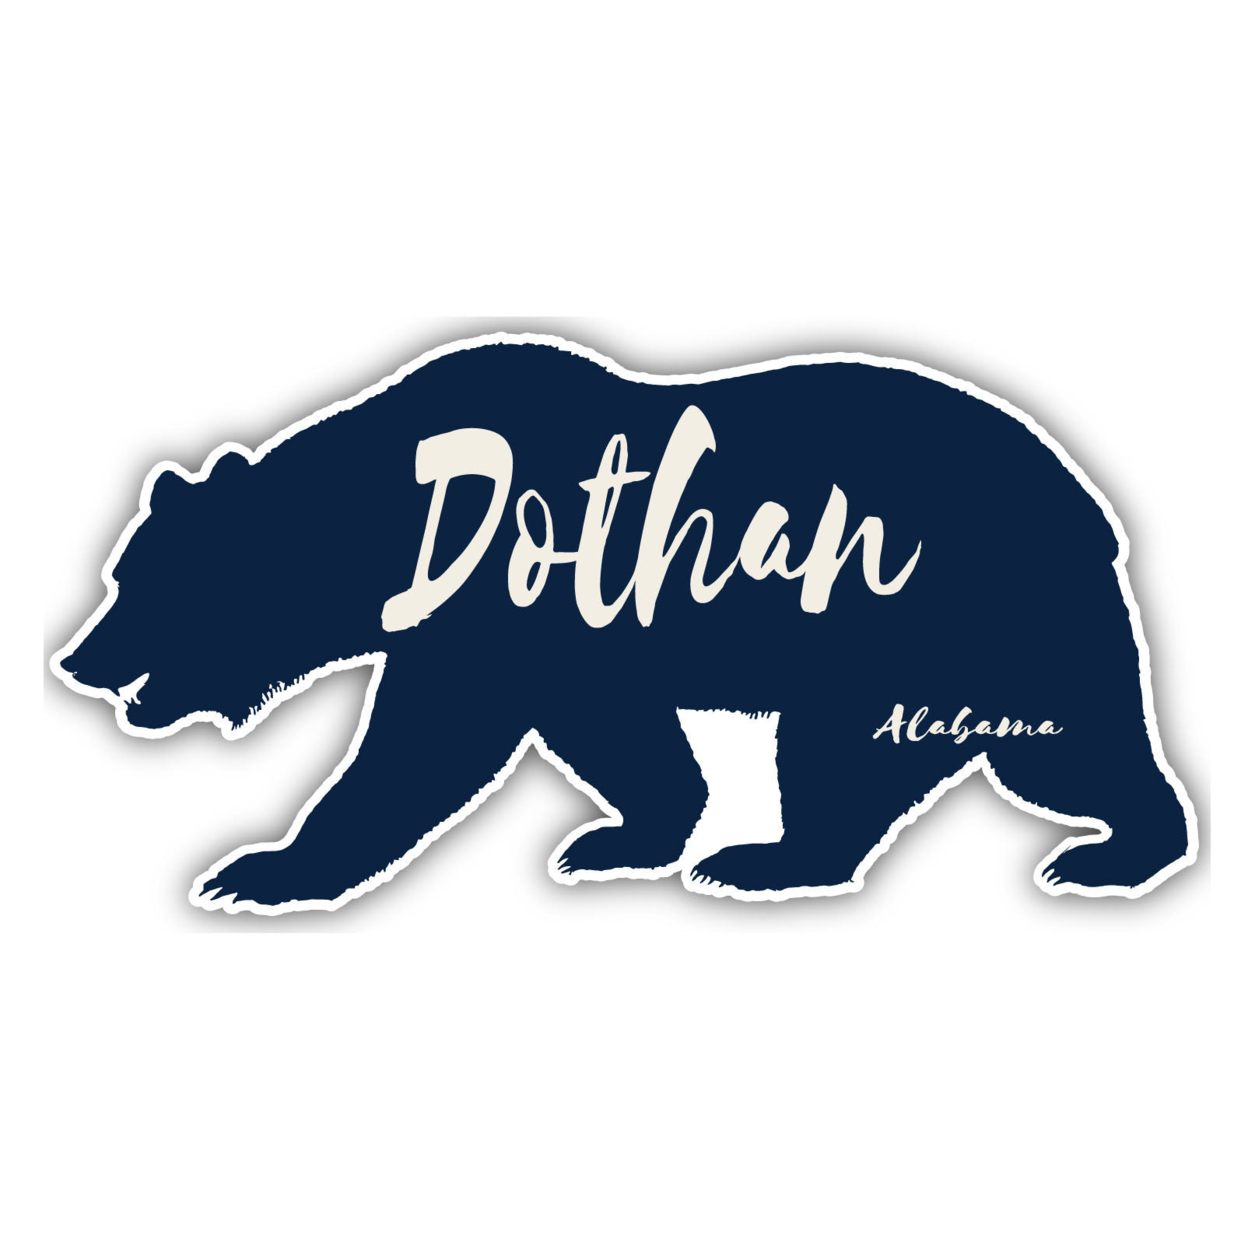 Dothan Alabama Souvenir Decorative Stickers (Choose Theme And Size) - 4-Pack, 8-Inch, Tent